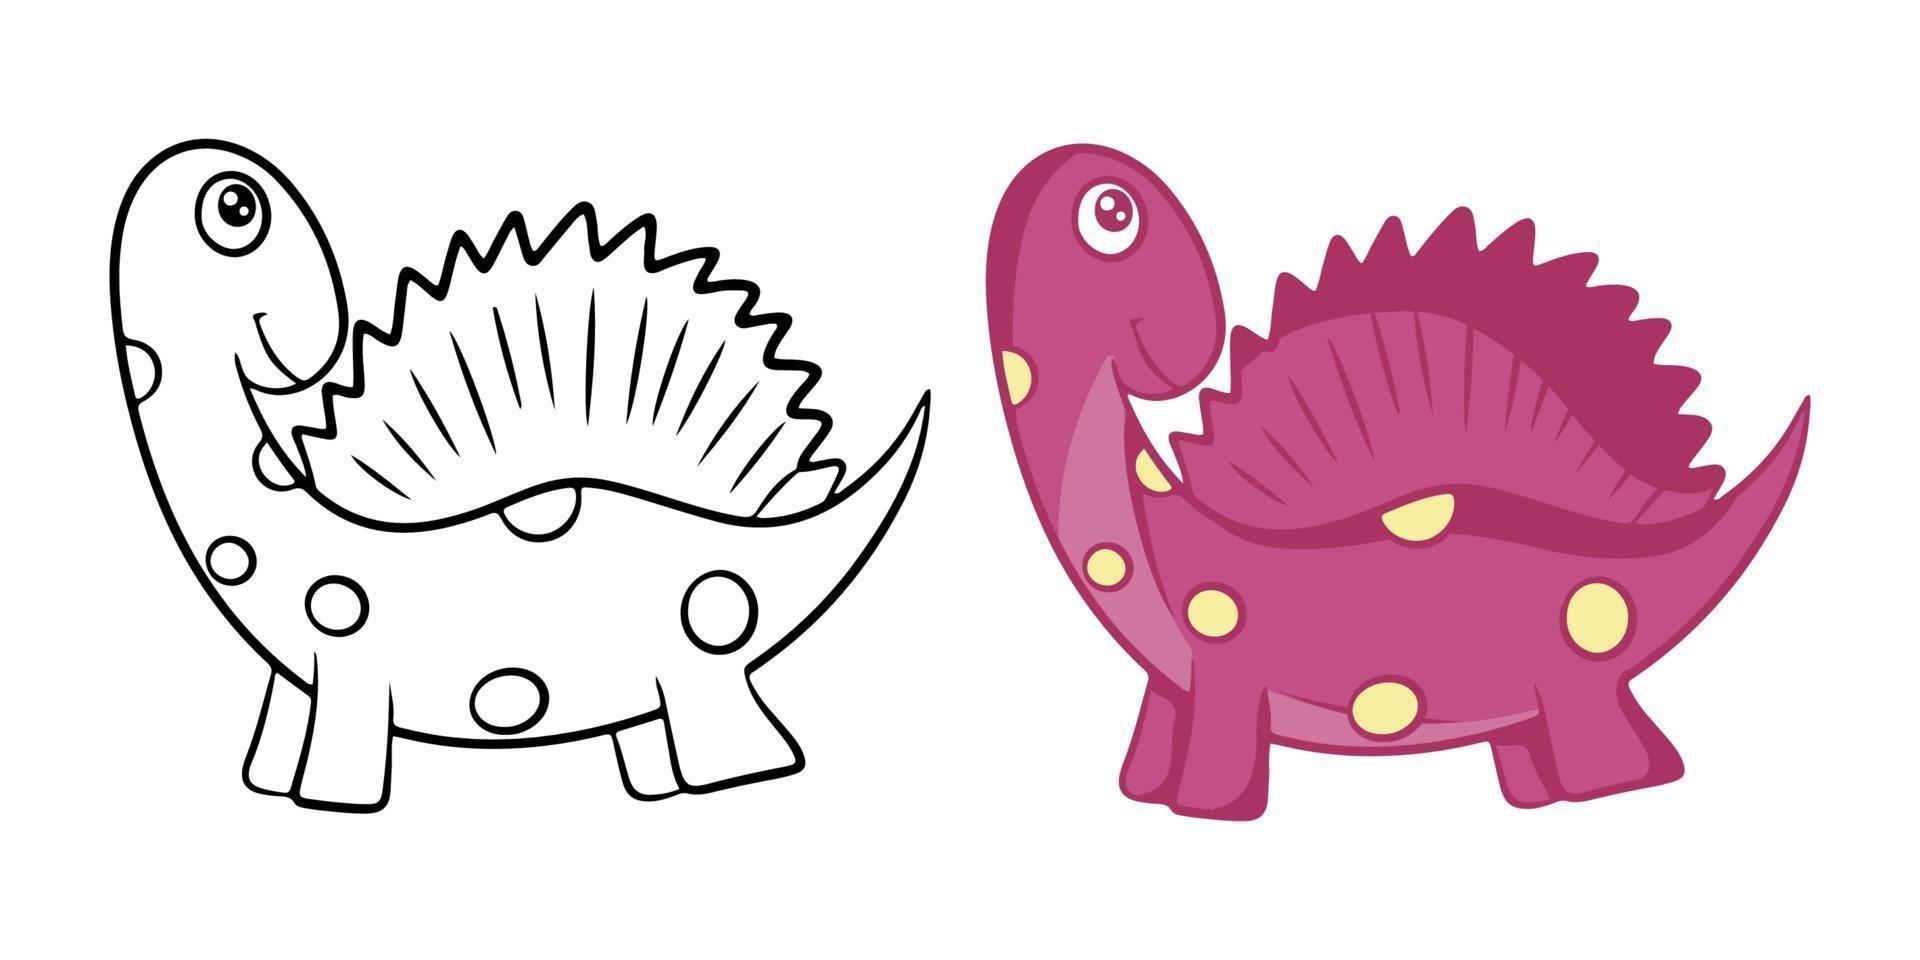 Dinosaur. Black and white vector illustration for coloring. Children's educational game. Vector, flat cartoon style.